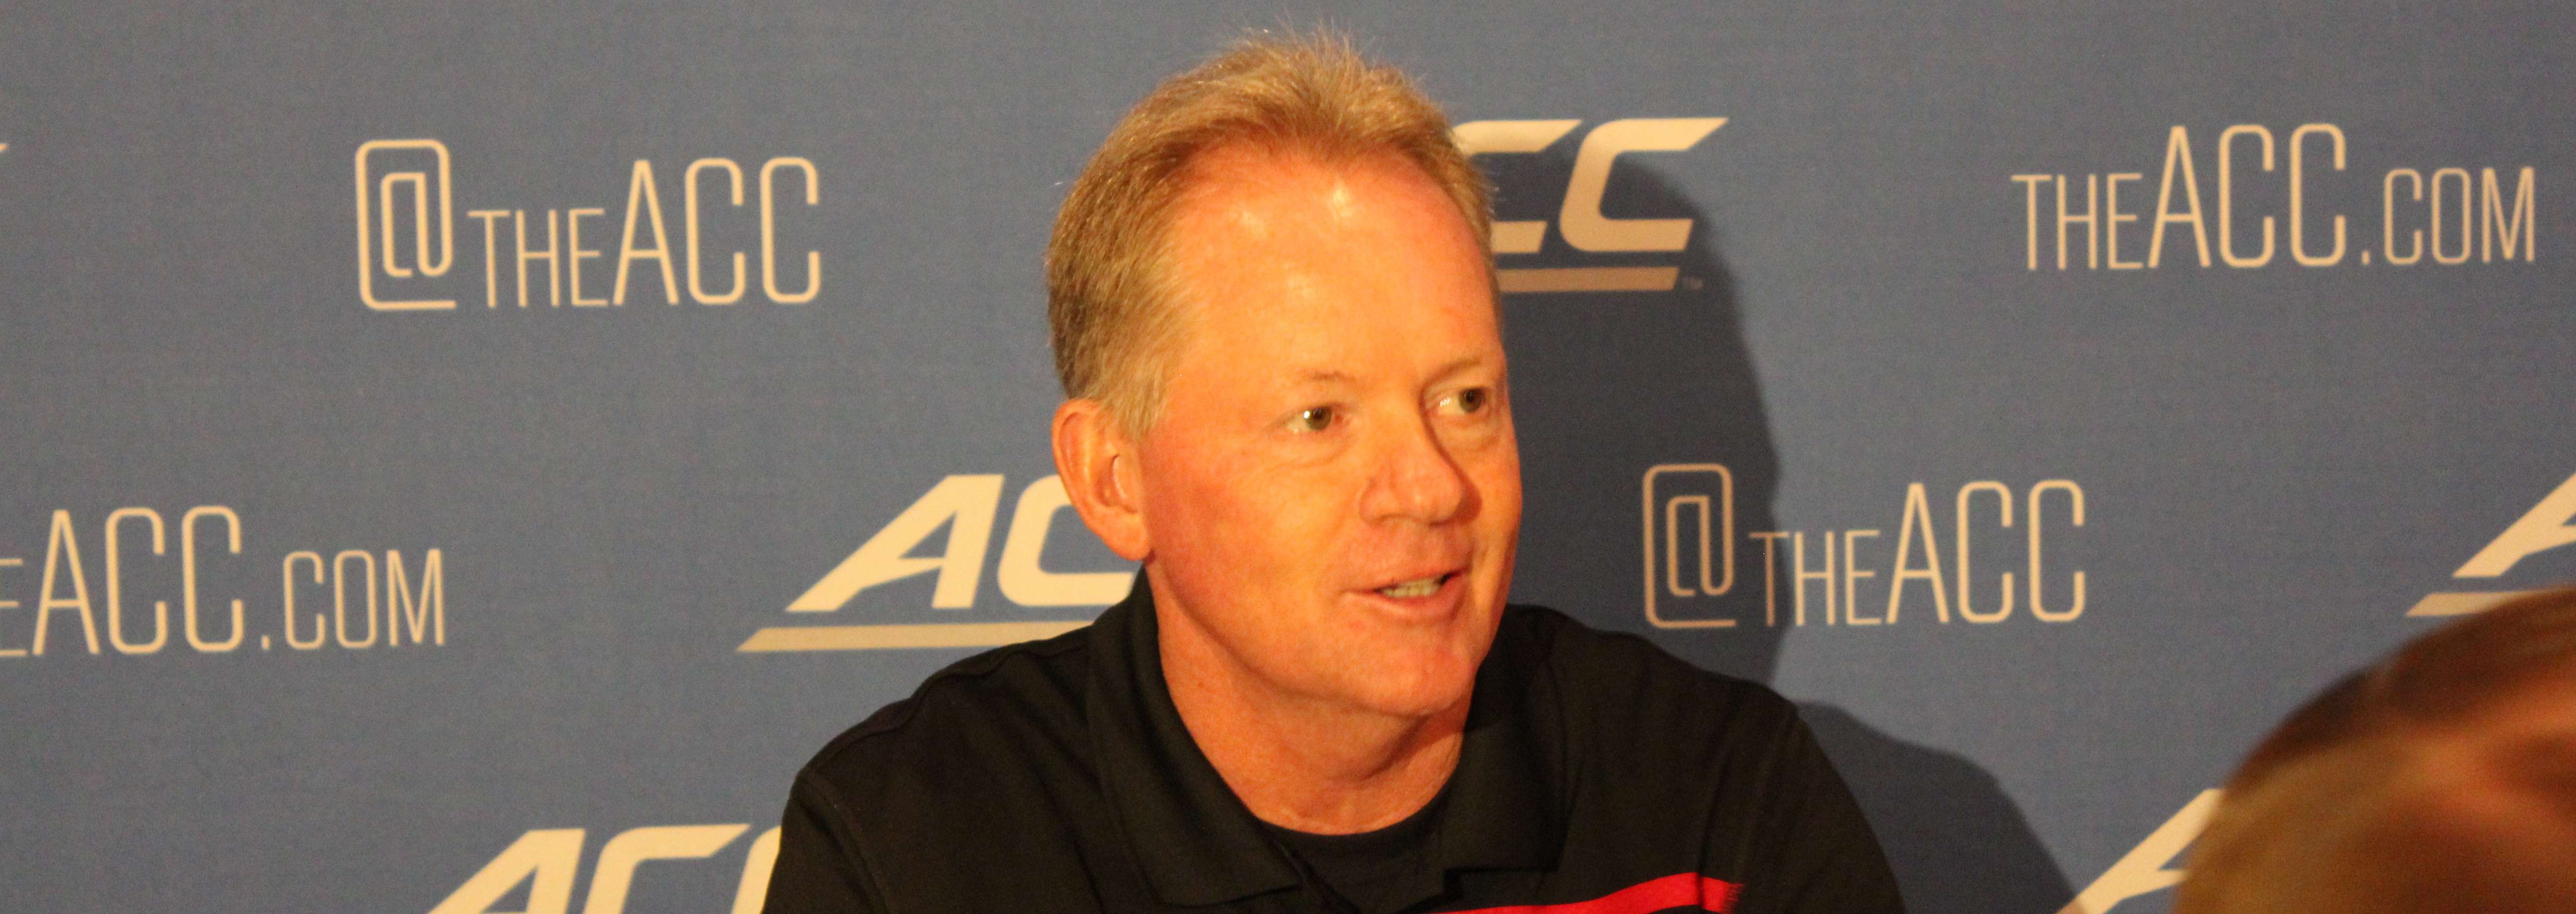 Bobby Petrino 2015 ACC Kickoff Photo by Mark Blankenbaker Fitted